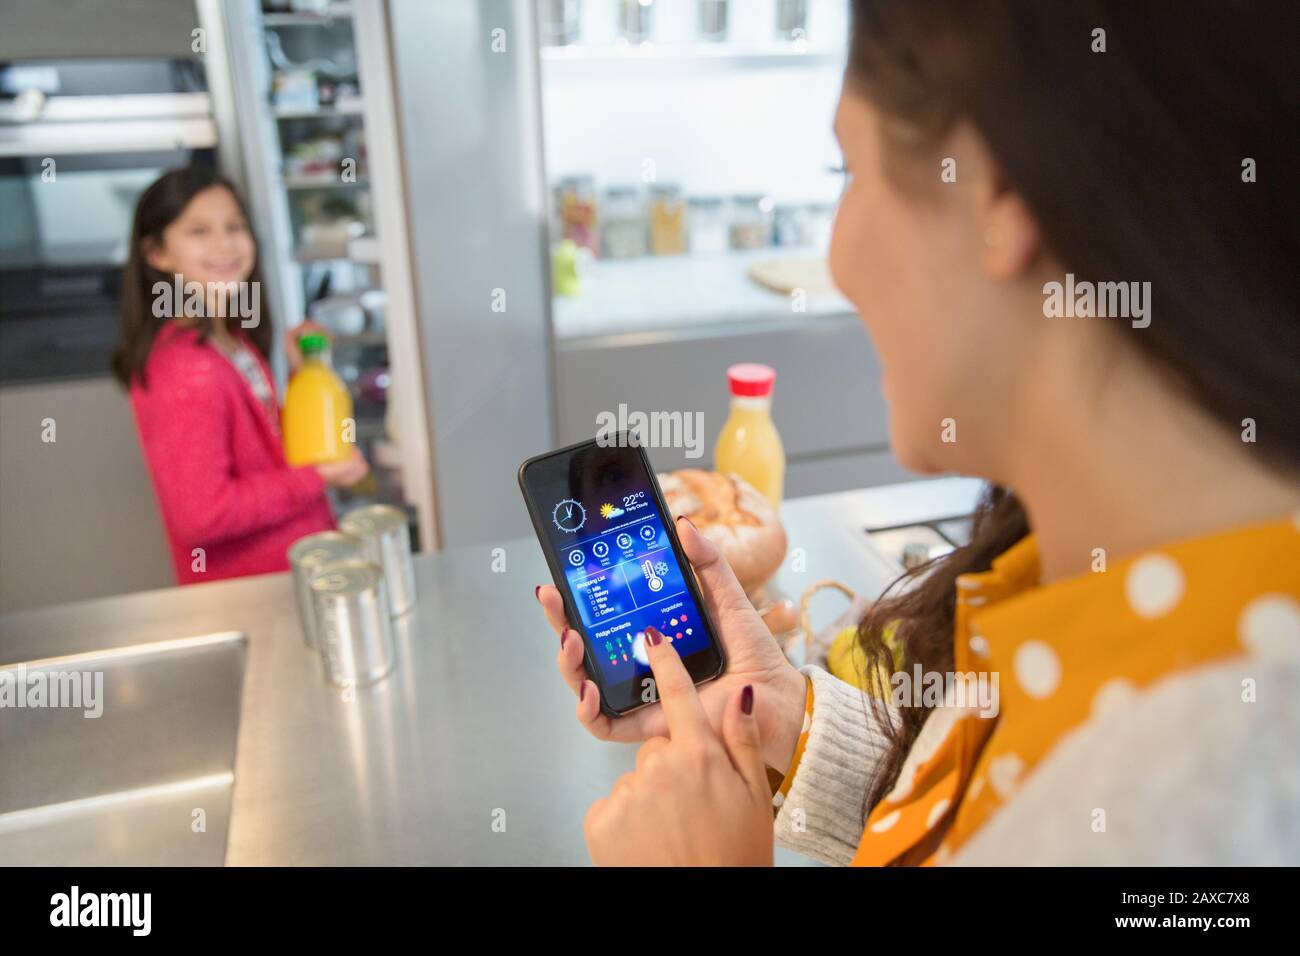 Mother using smart phone app to track groceries in refrigerator, watching daughter Stock Photo